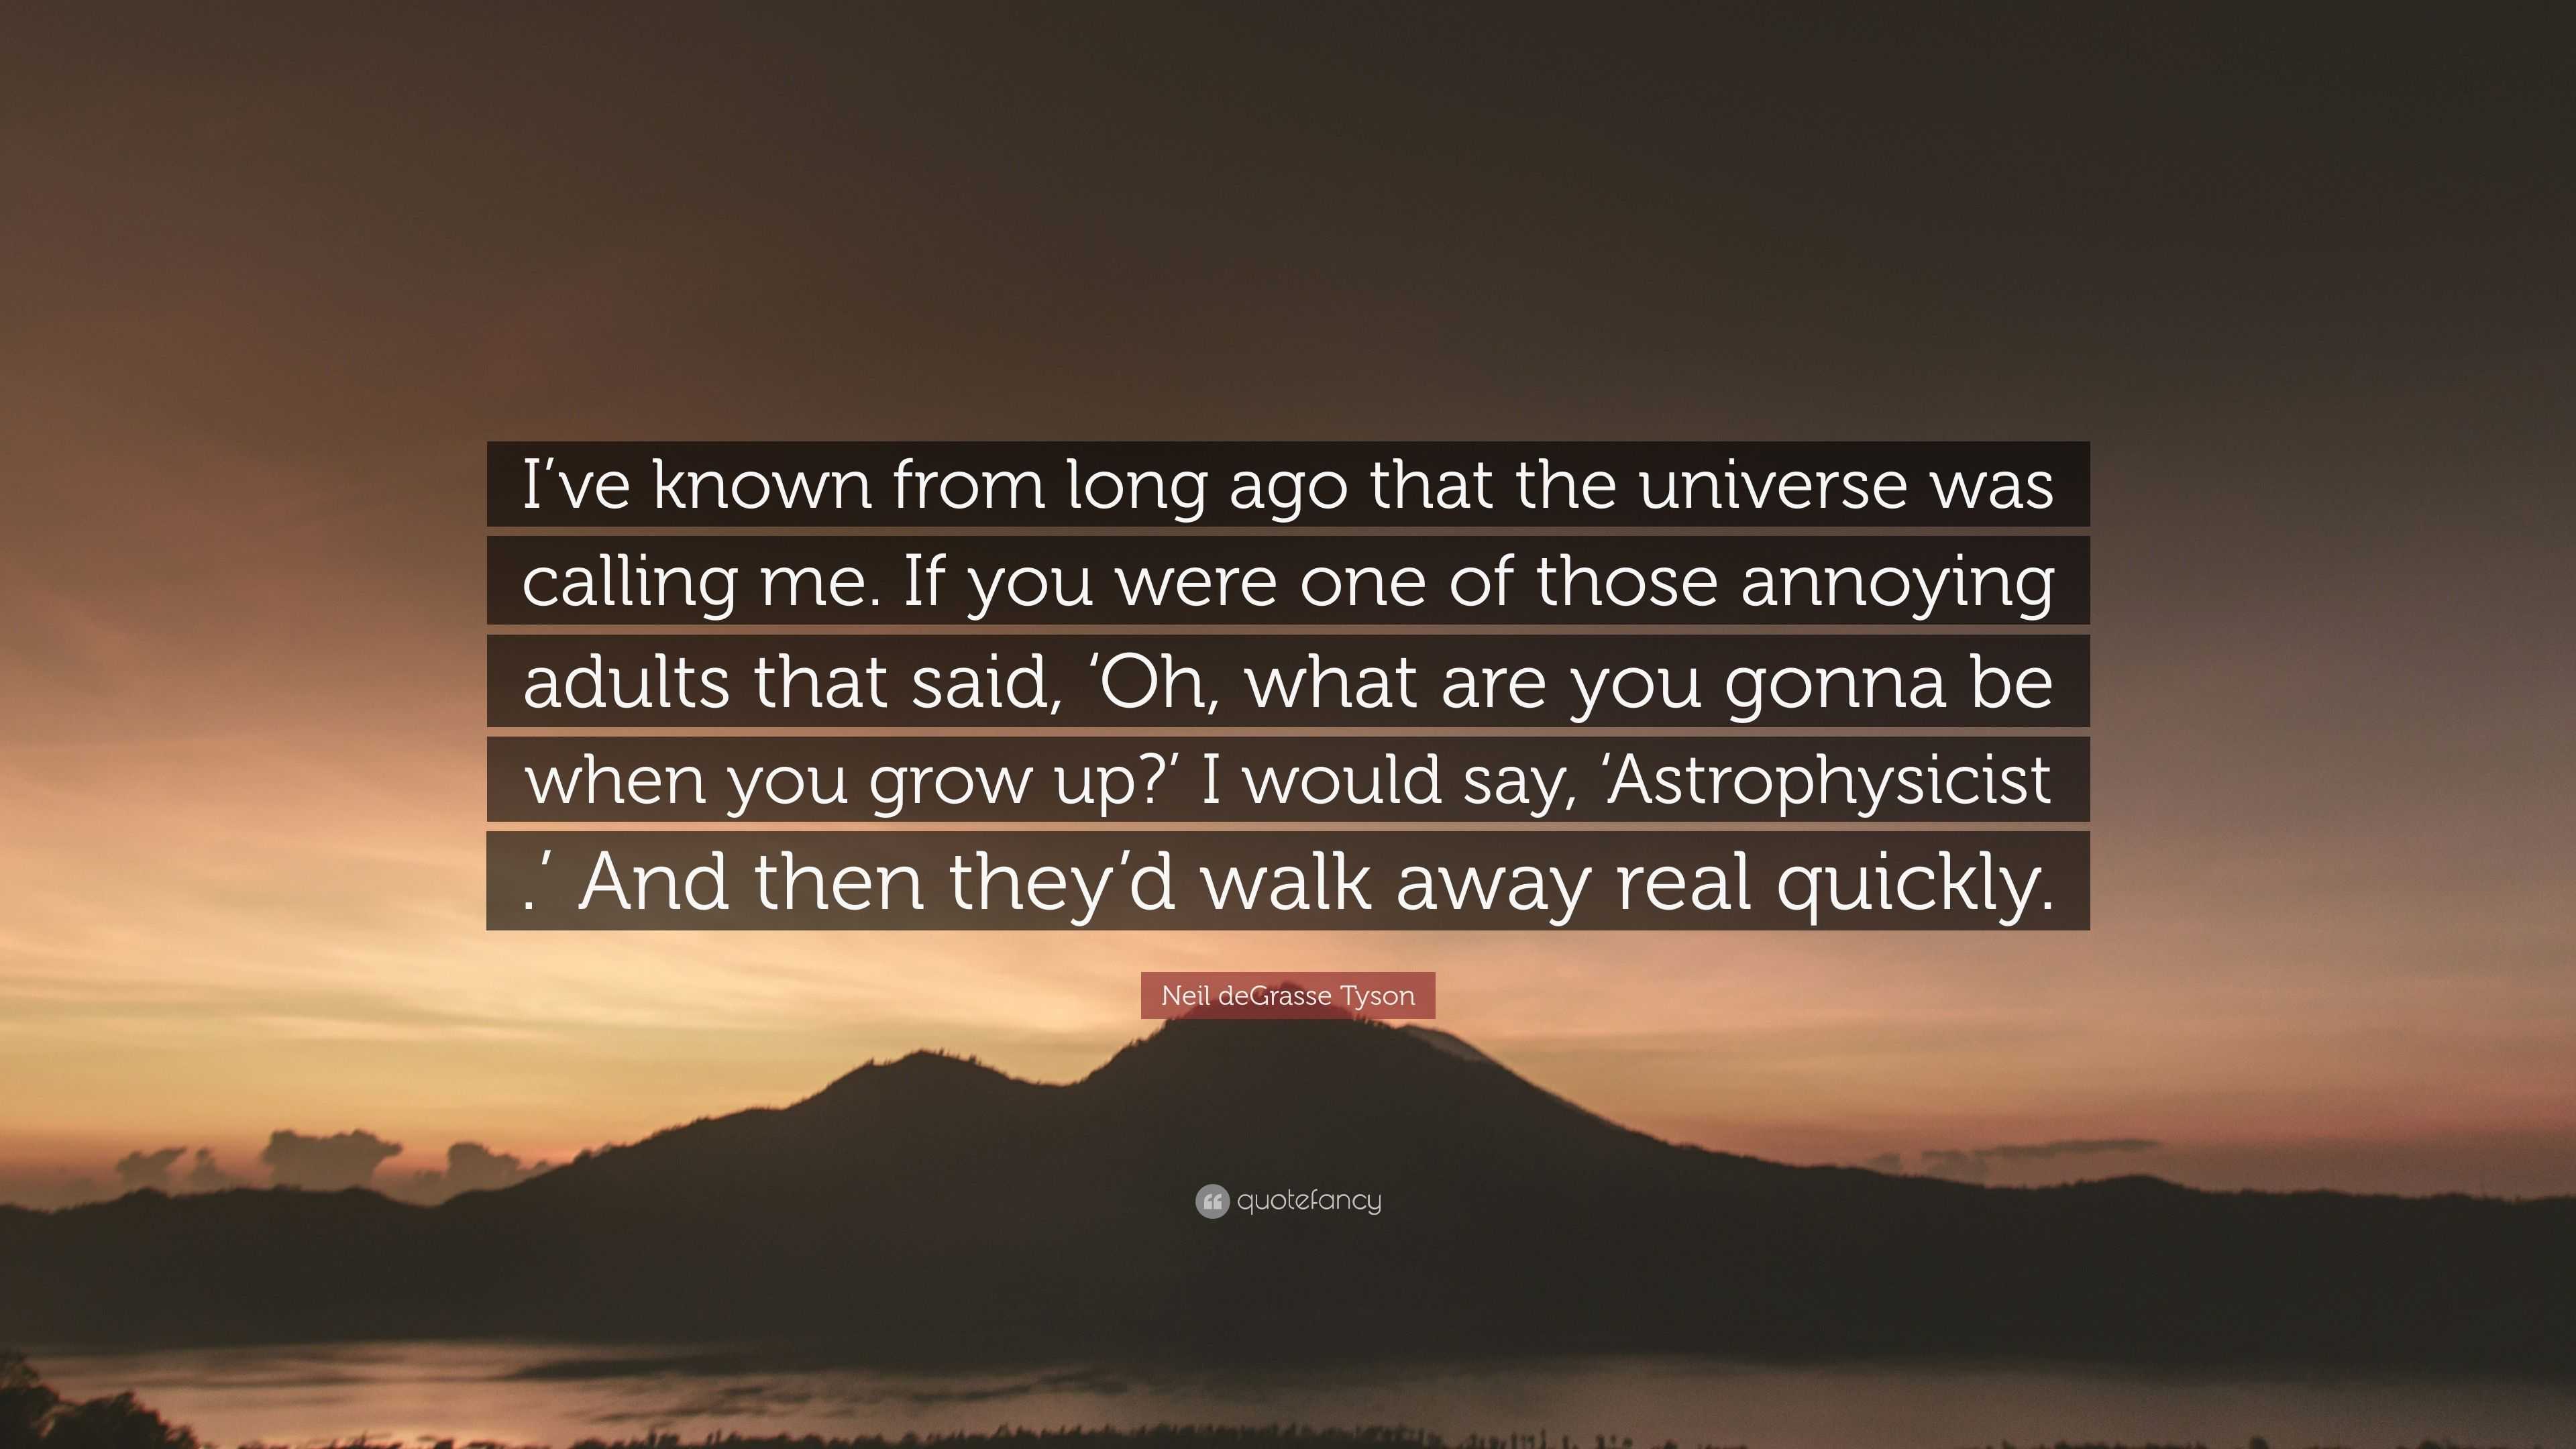 Neil deGrasse Tyson Quote: “I’ve known from long ago that the universe ...